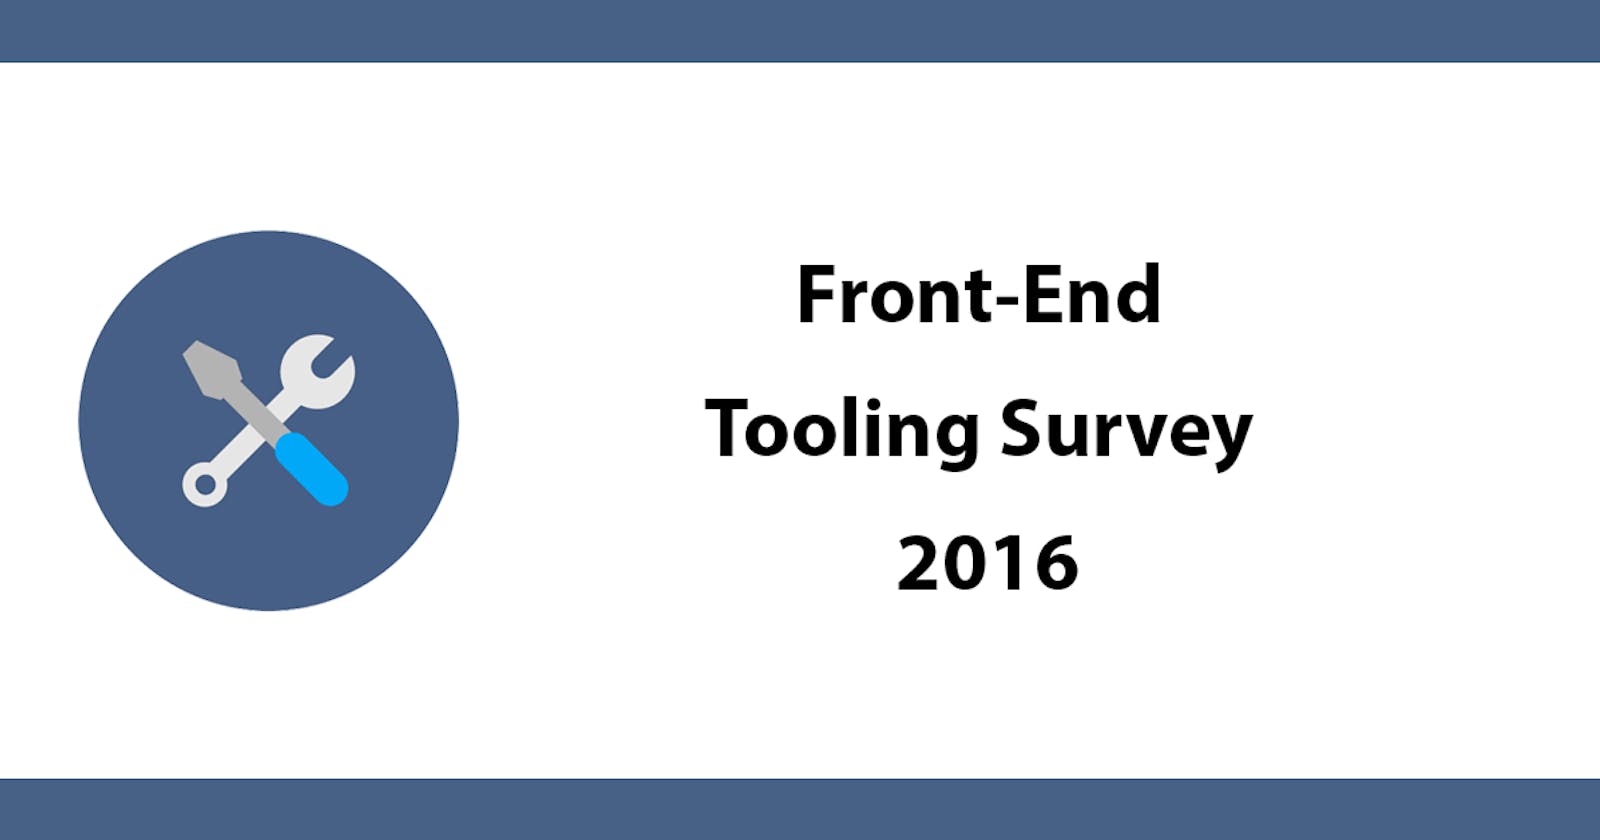 Front-End Tooling Survey 2016